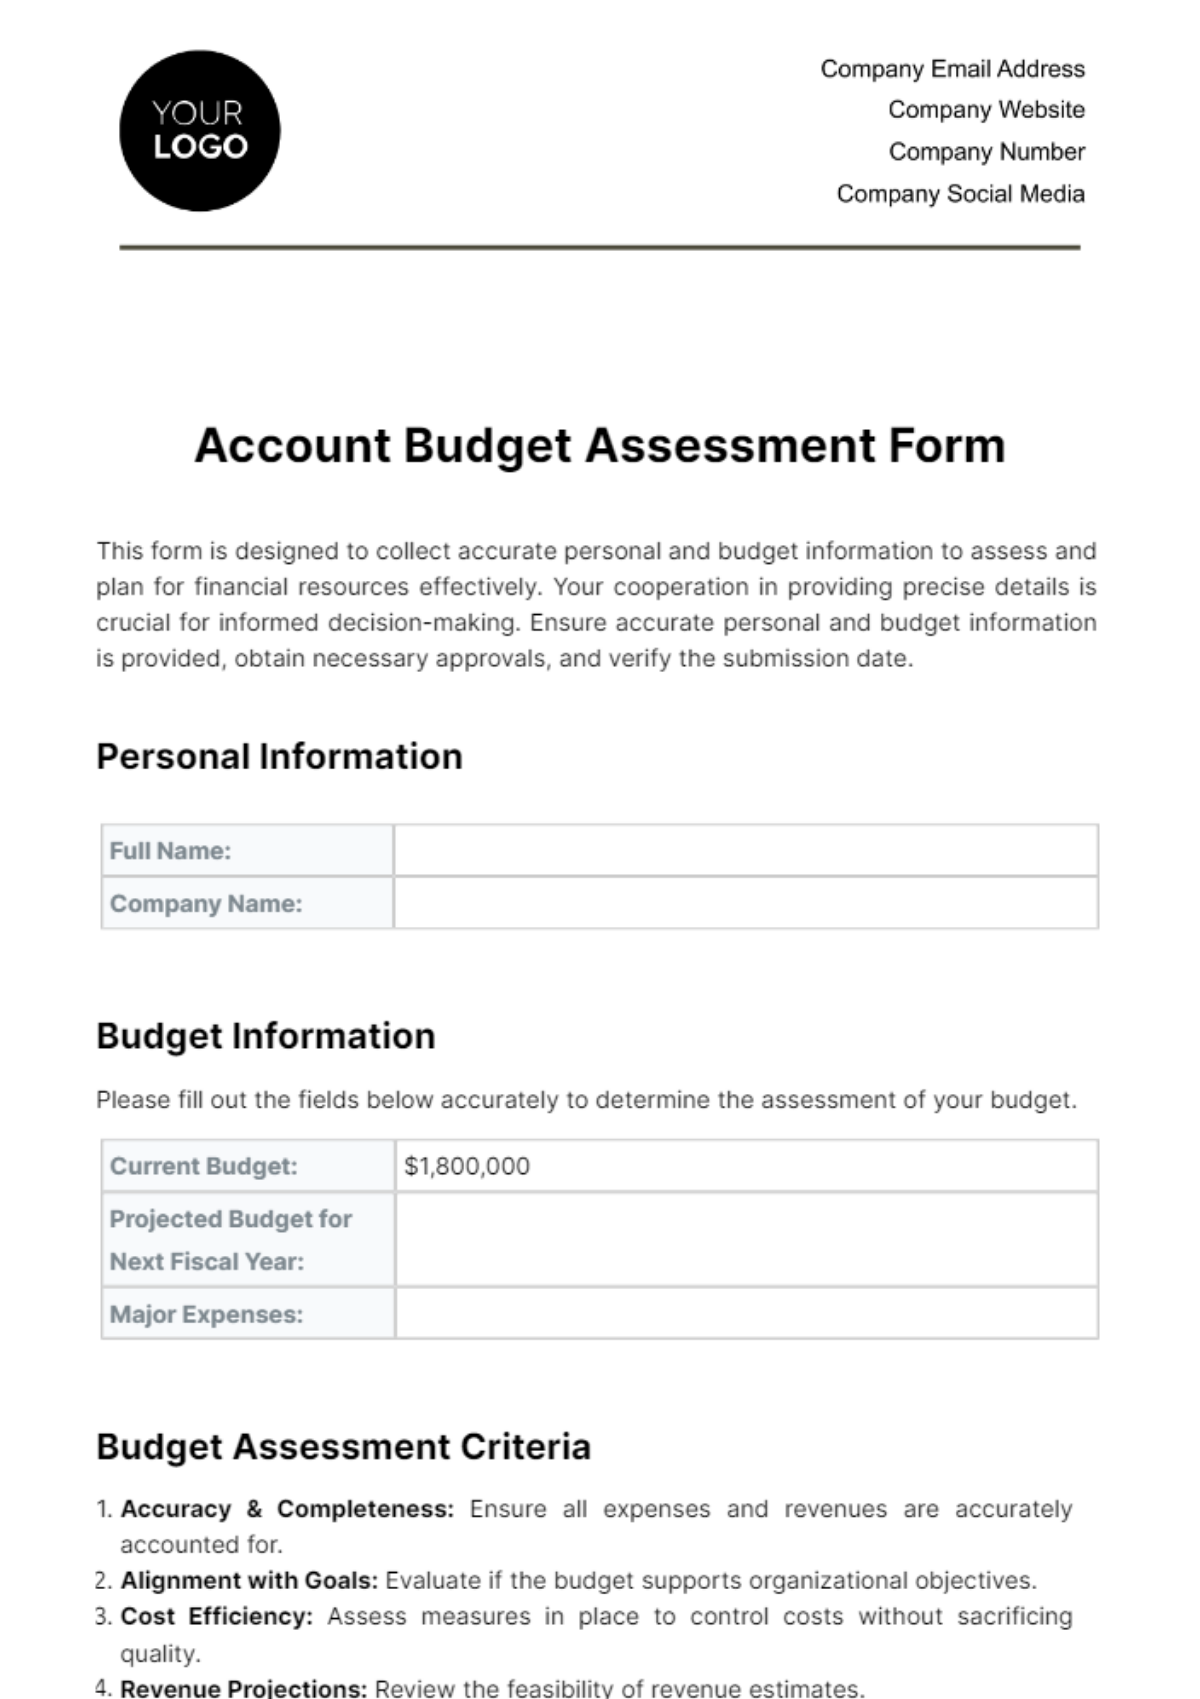 Free Account Budget Assessment Form Template